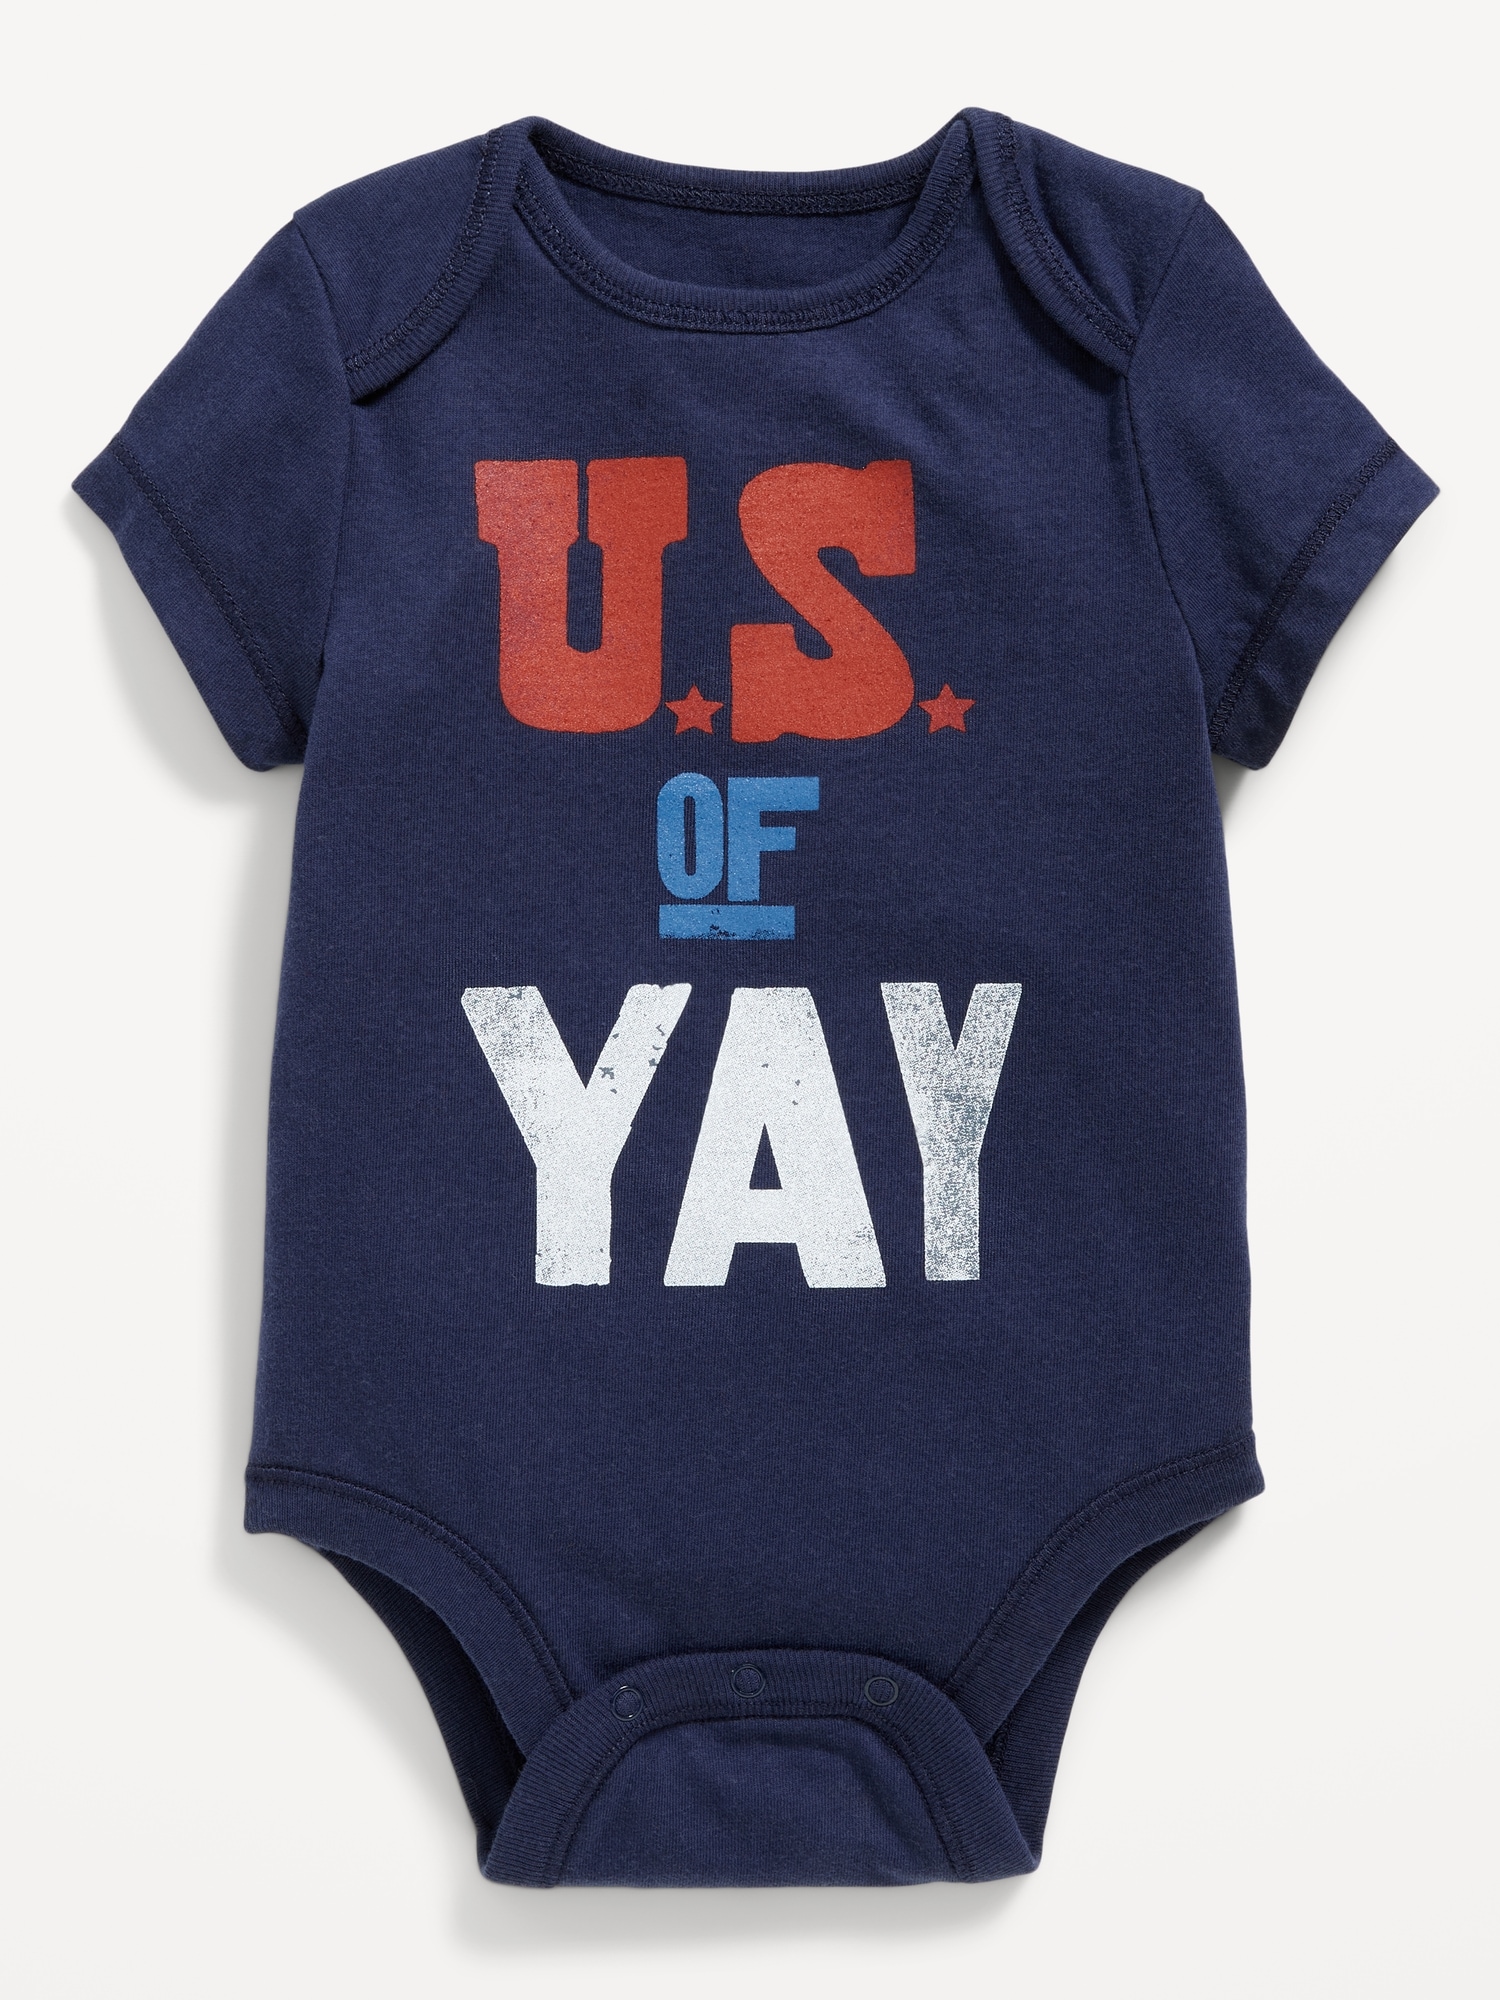 Do old navy baby clothes run small? - July 2019 Babies